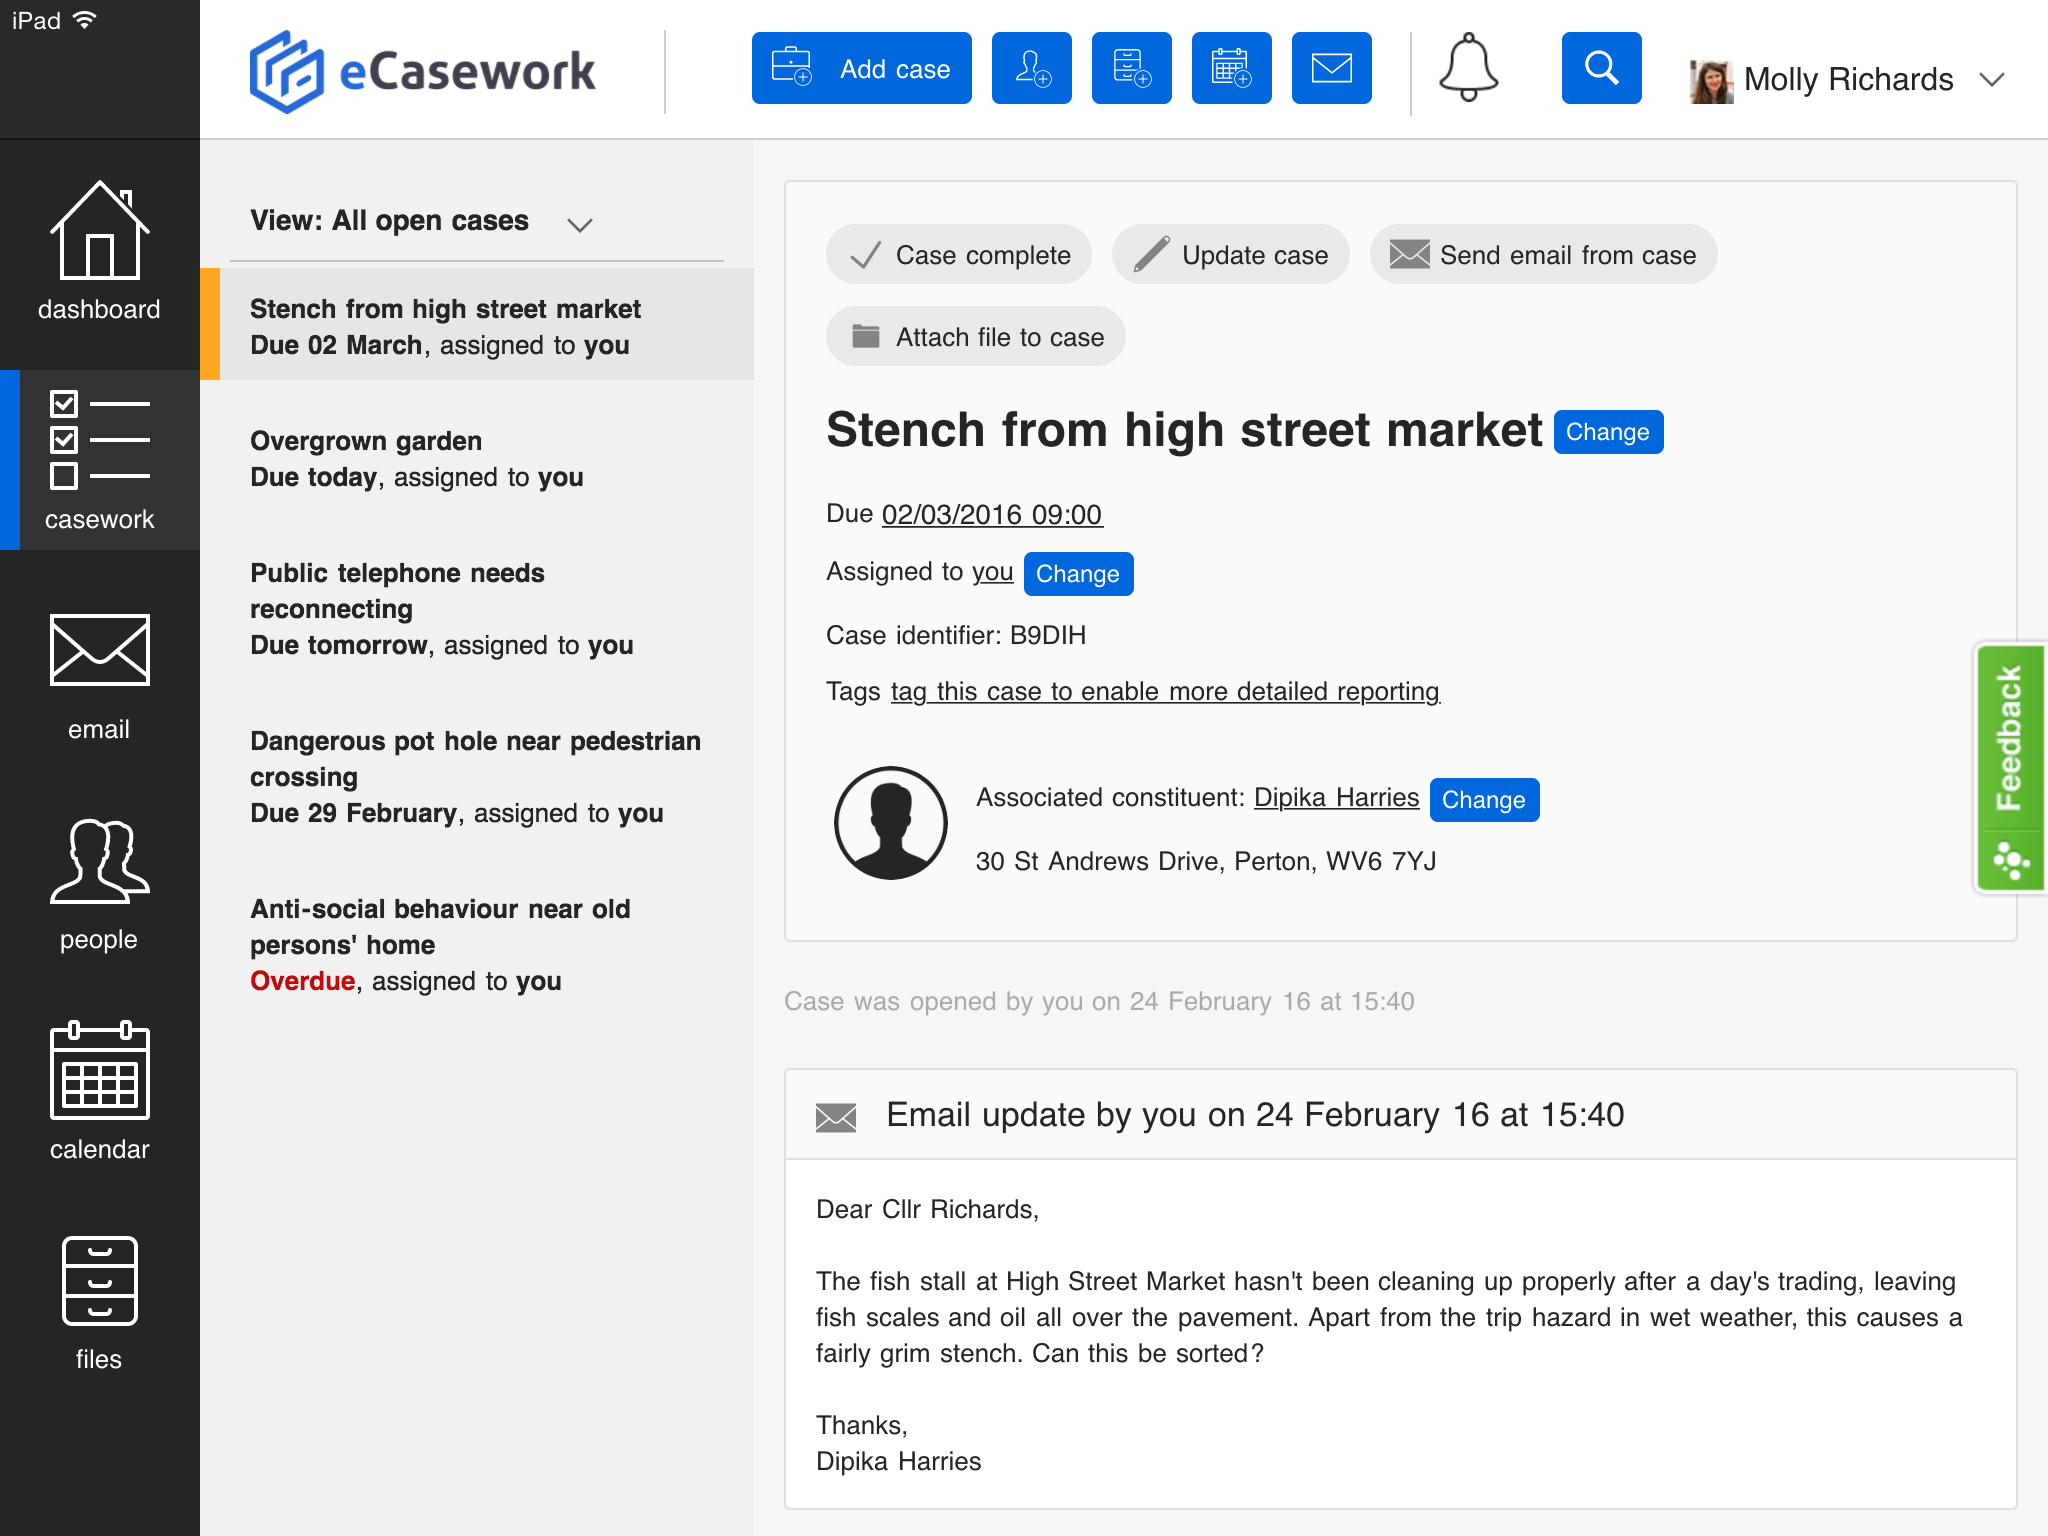 A screenshot of the casework section within eCasework